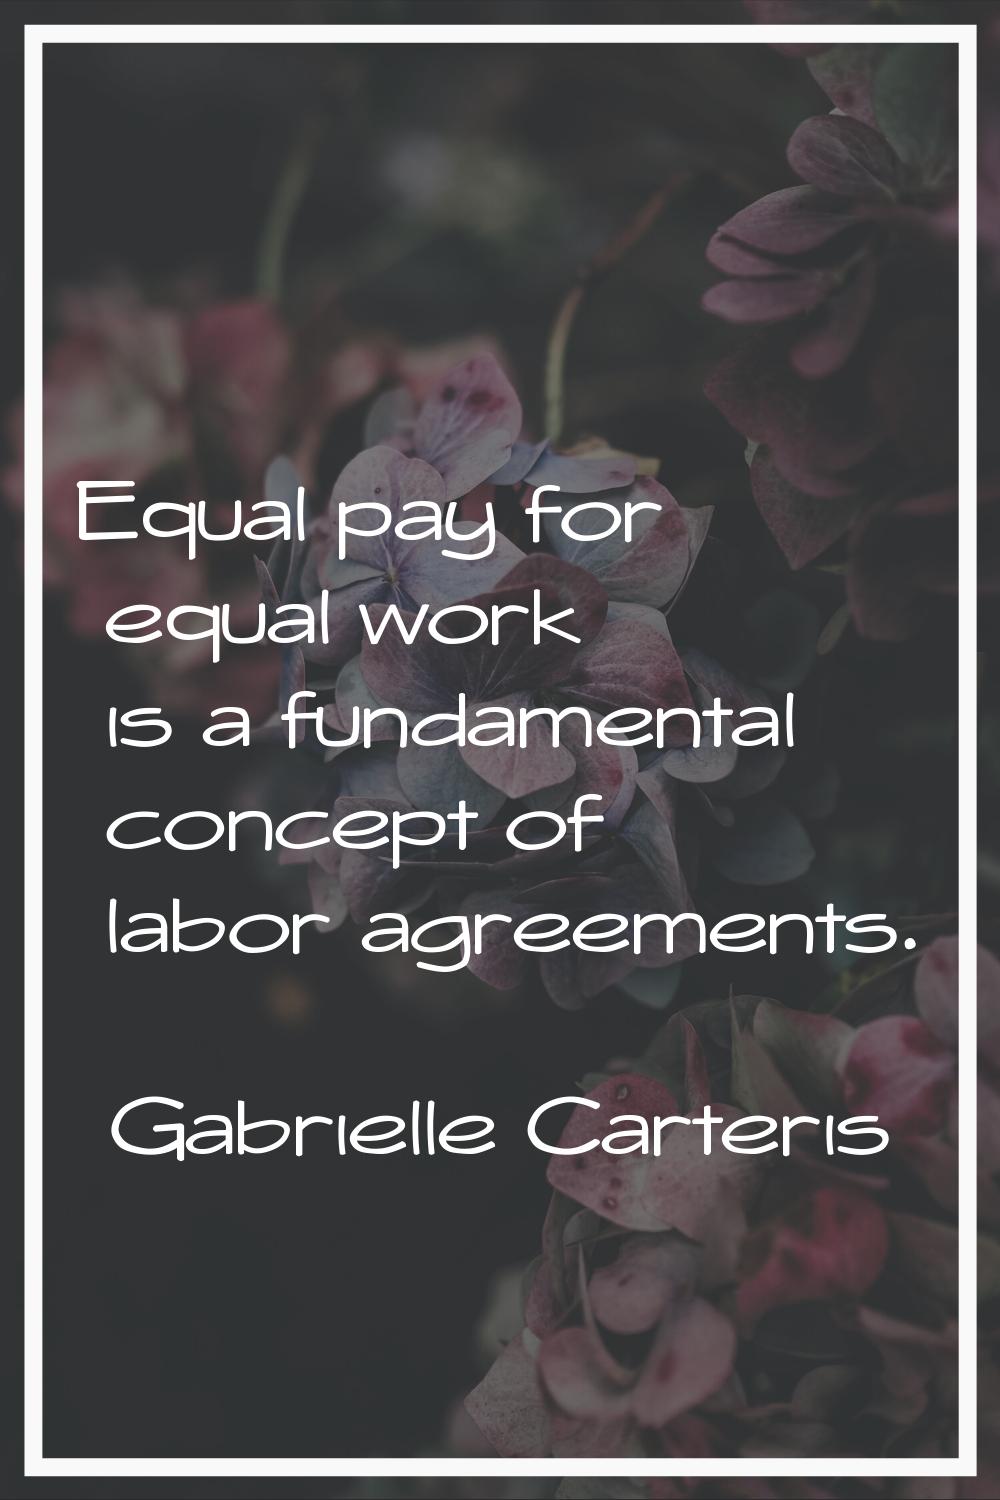 Equal pay for equal work is a fundamental concept of labor agreements.